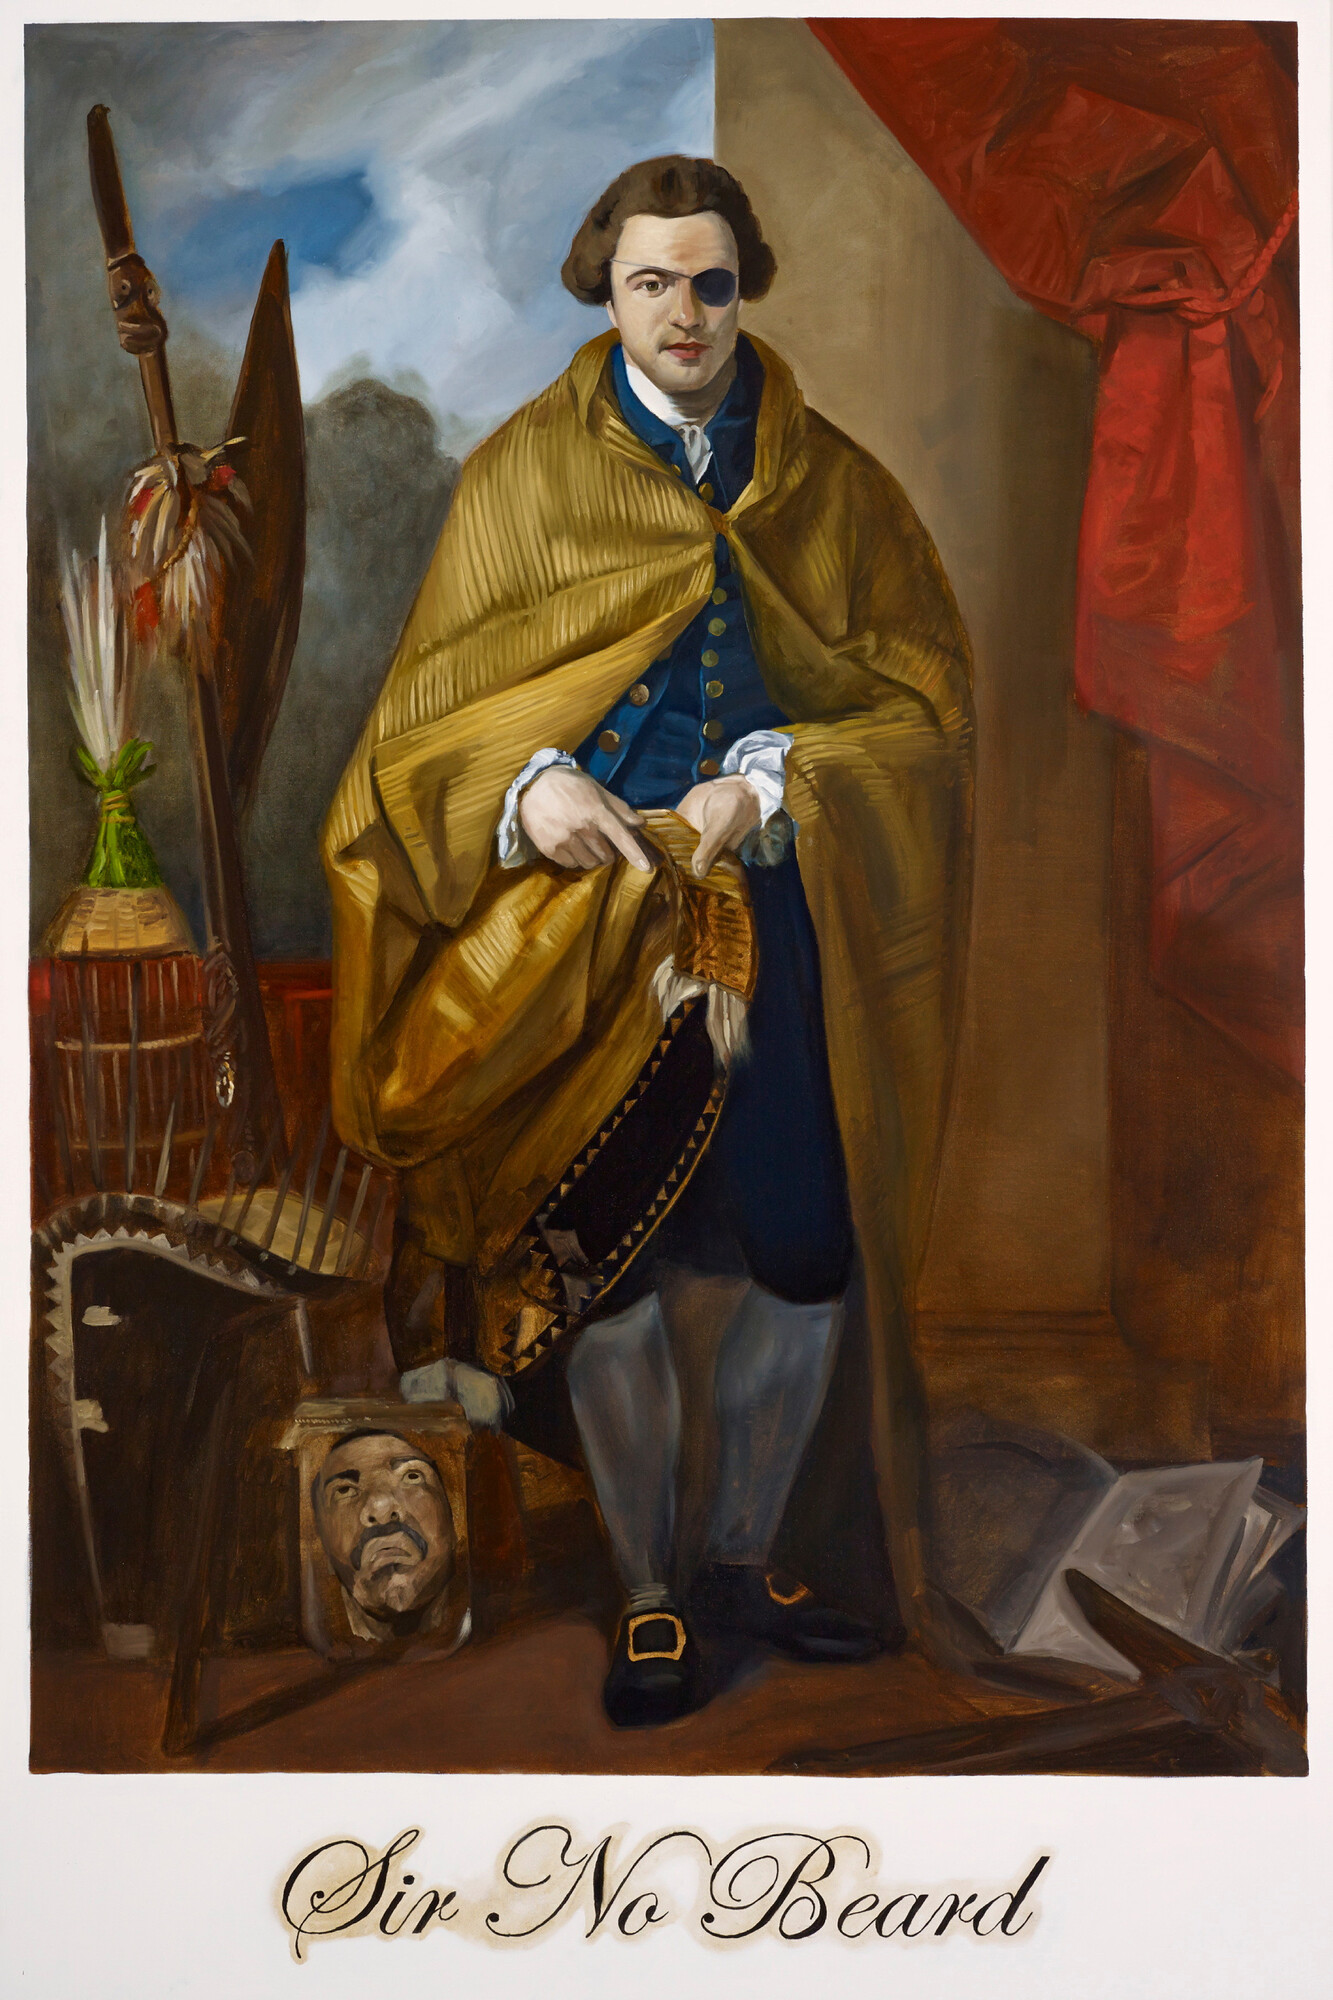 Daniel Boyd, <em>Sir No Beard</em>, 2007, oil on canvas, 183.5 x 121.5 cm, Art Gallery of New South Wales, Sydney, gift of Clinton Ng 2012, donated through the Australian Government’s Cultural Gifts Program, 378.2012. Image: AGNSW, Felicity Jenkins. © Daniel Boyd